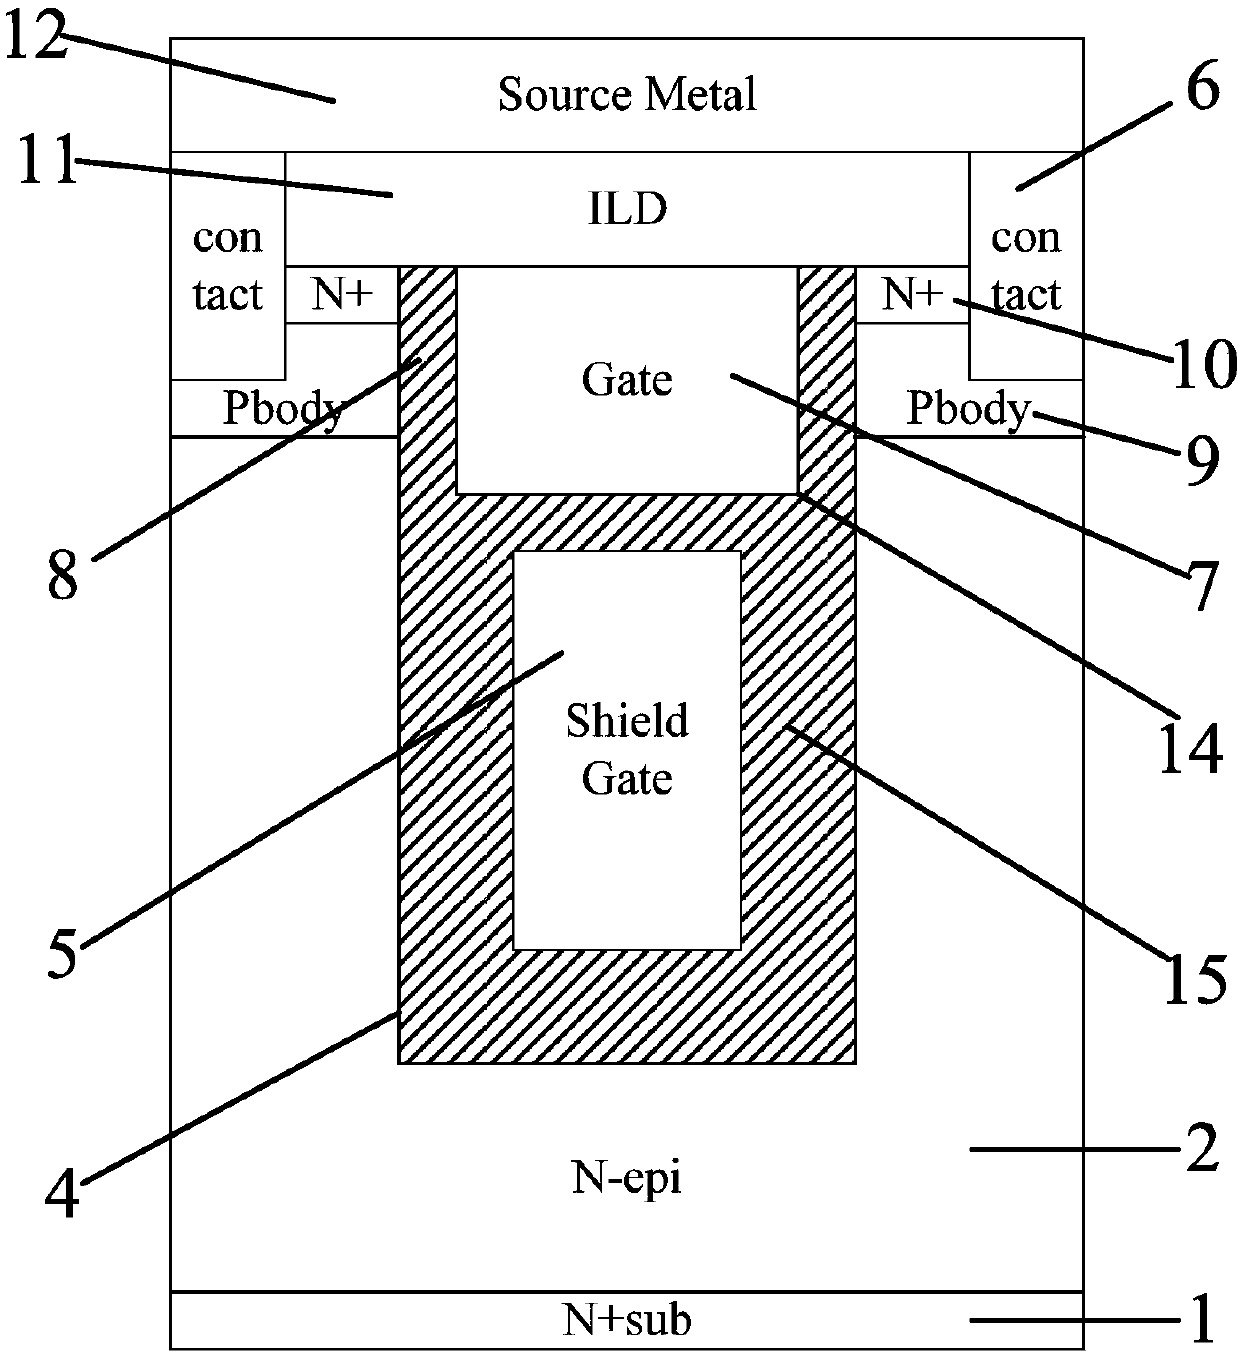 Shielding gate MOS structure with gradually changing oxide layer